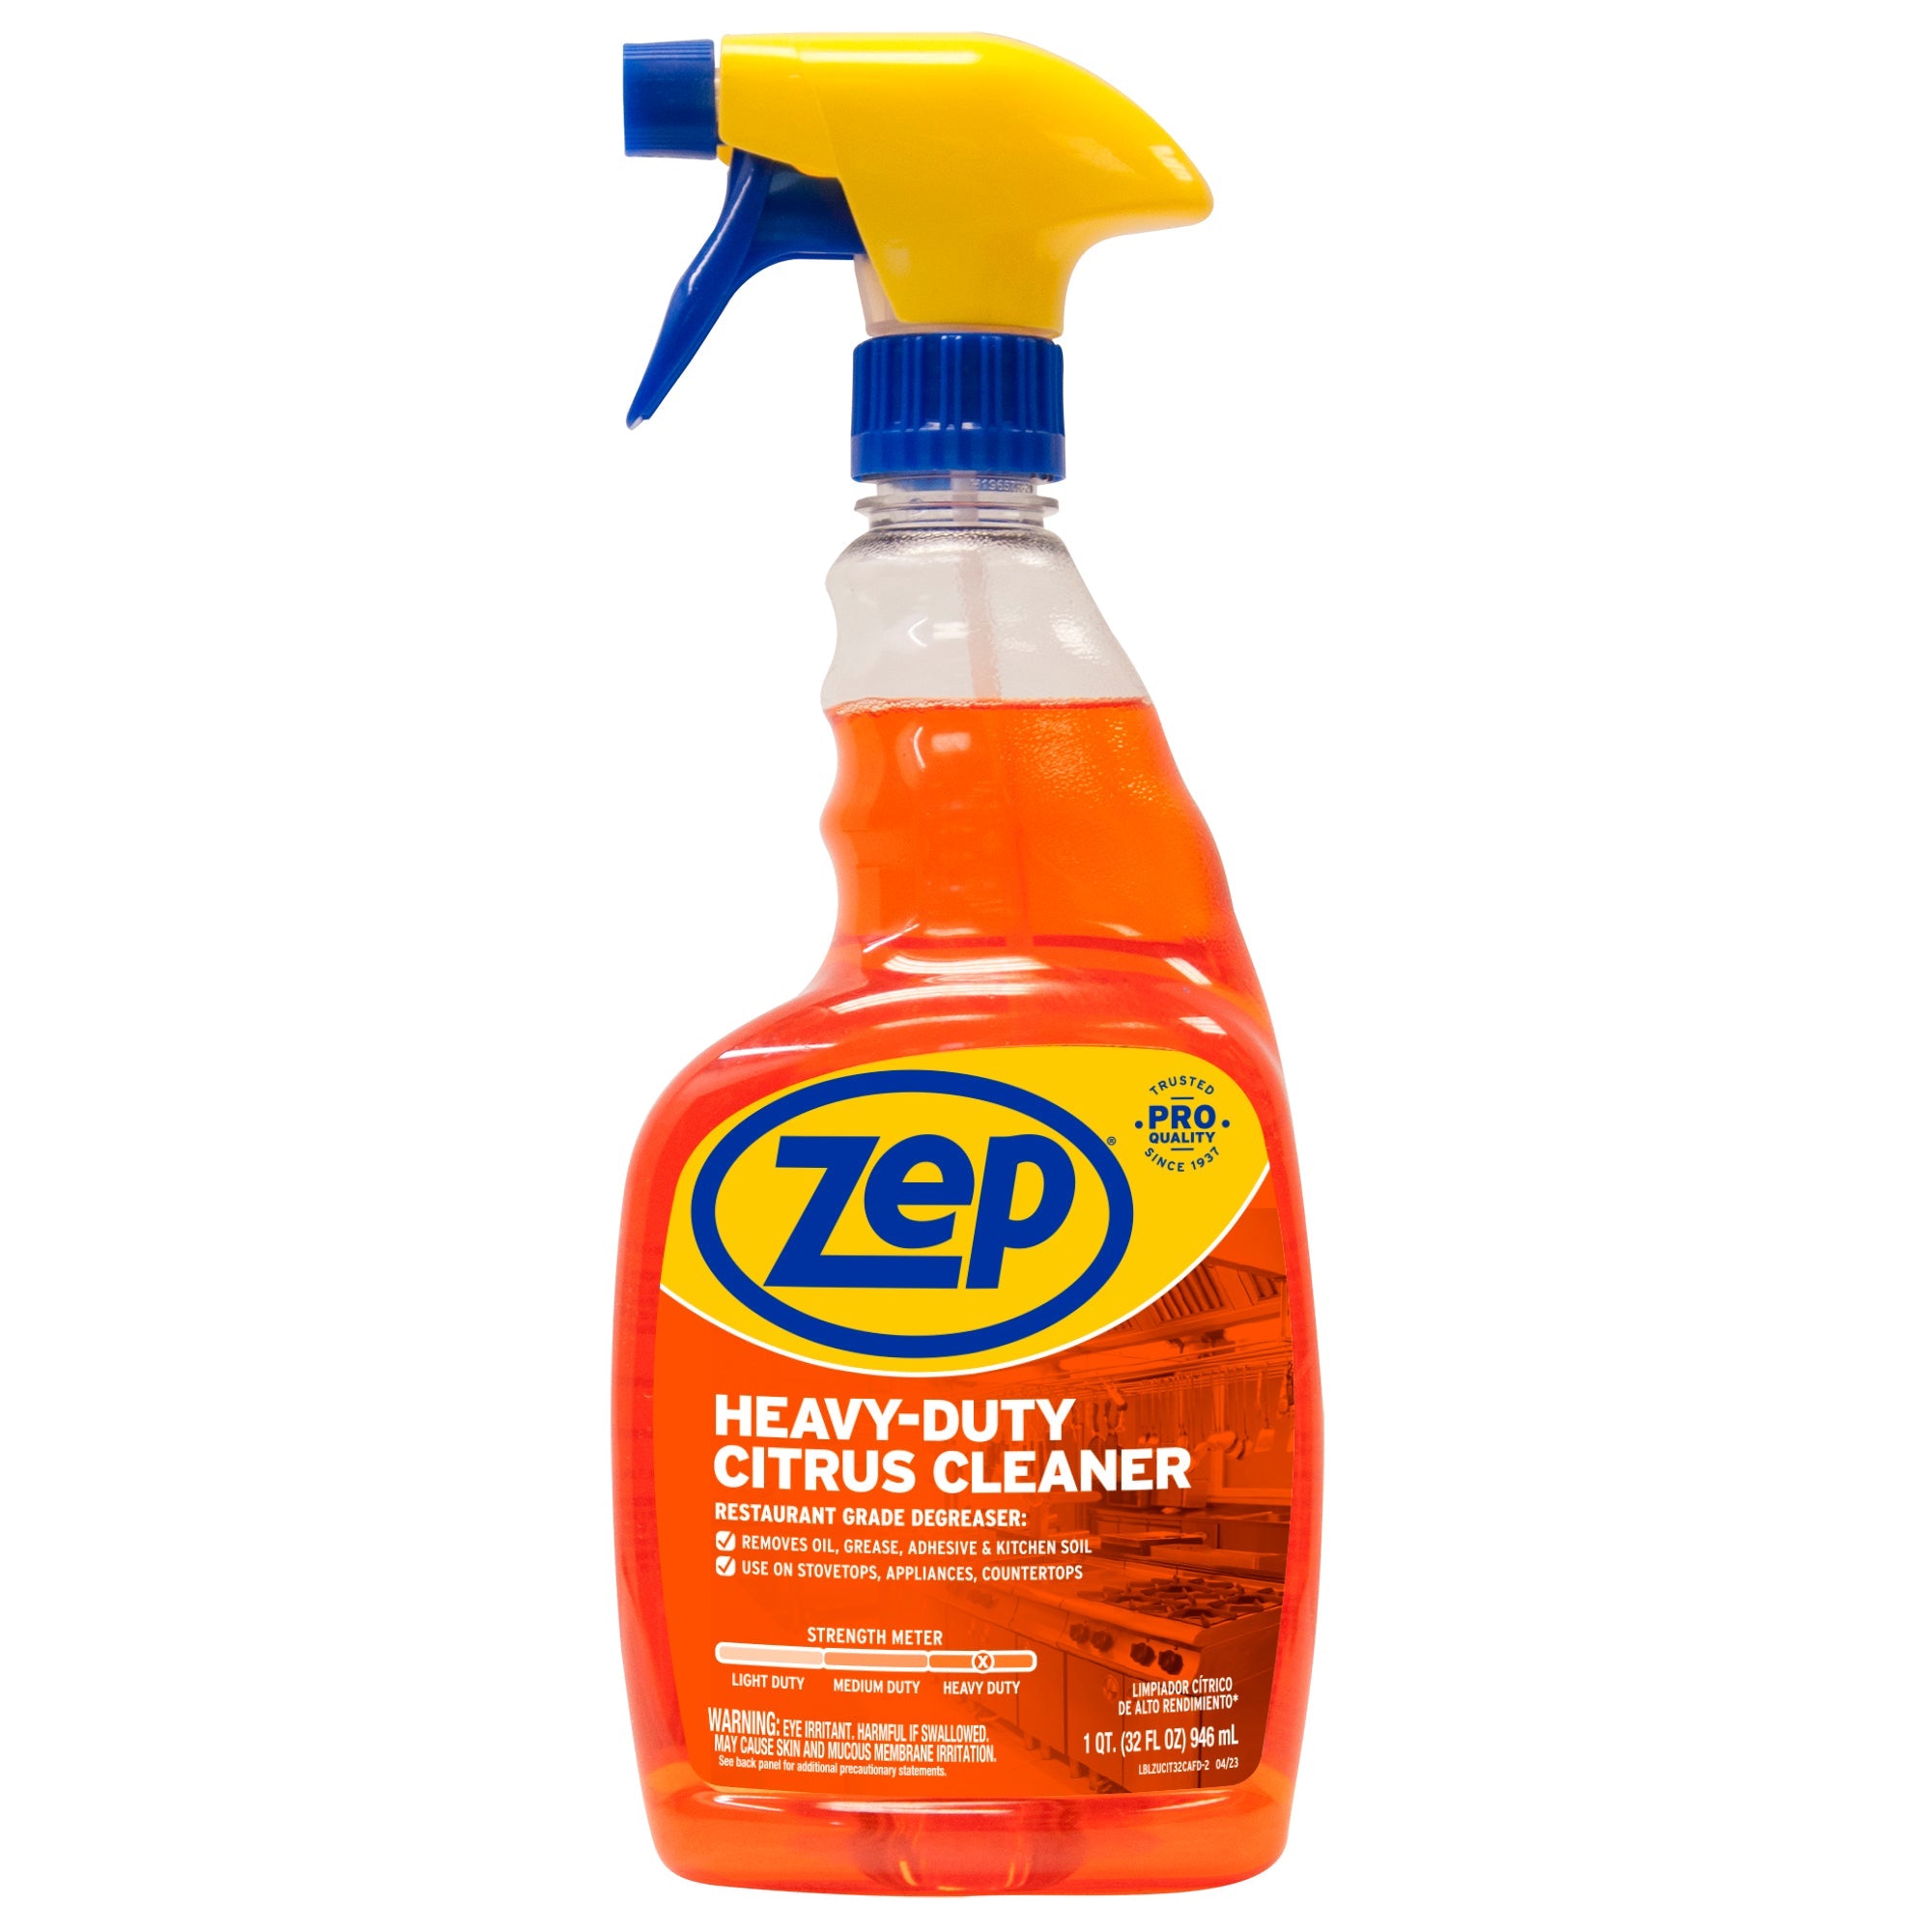 Image for Heavy-Duty Citrus Cleaner - 32 oz.